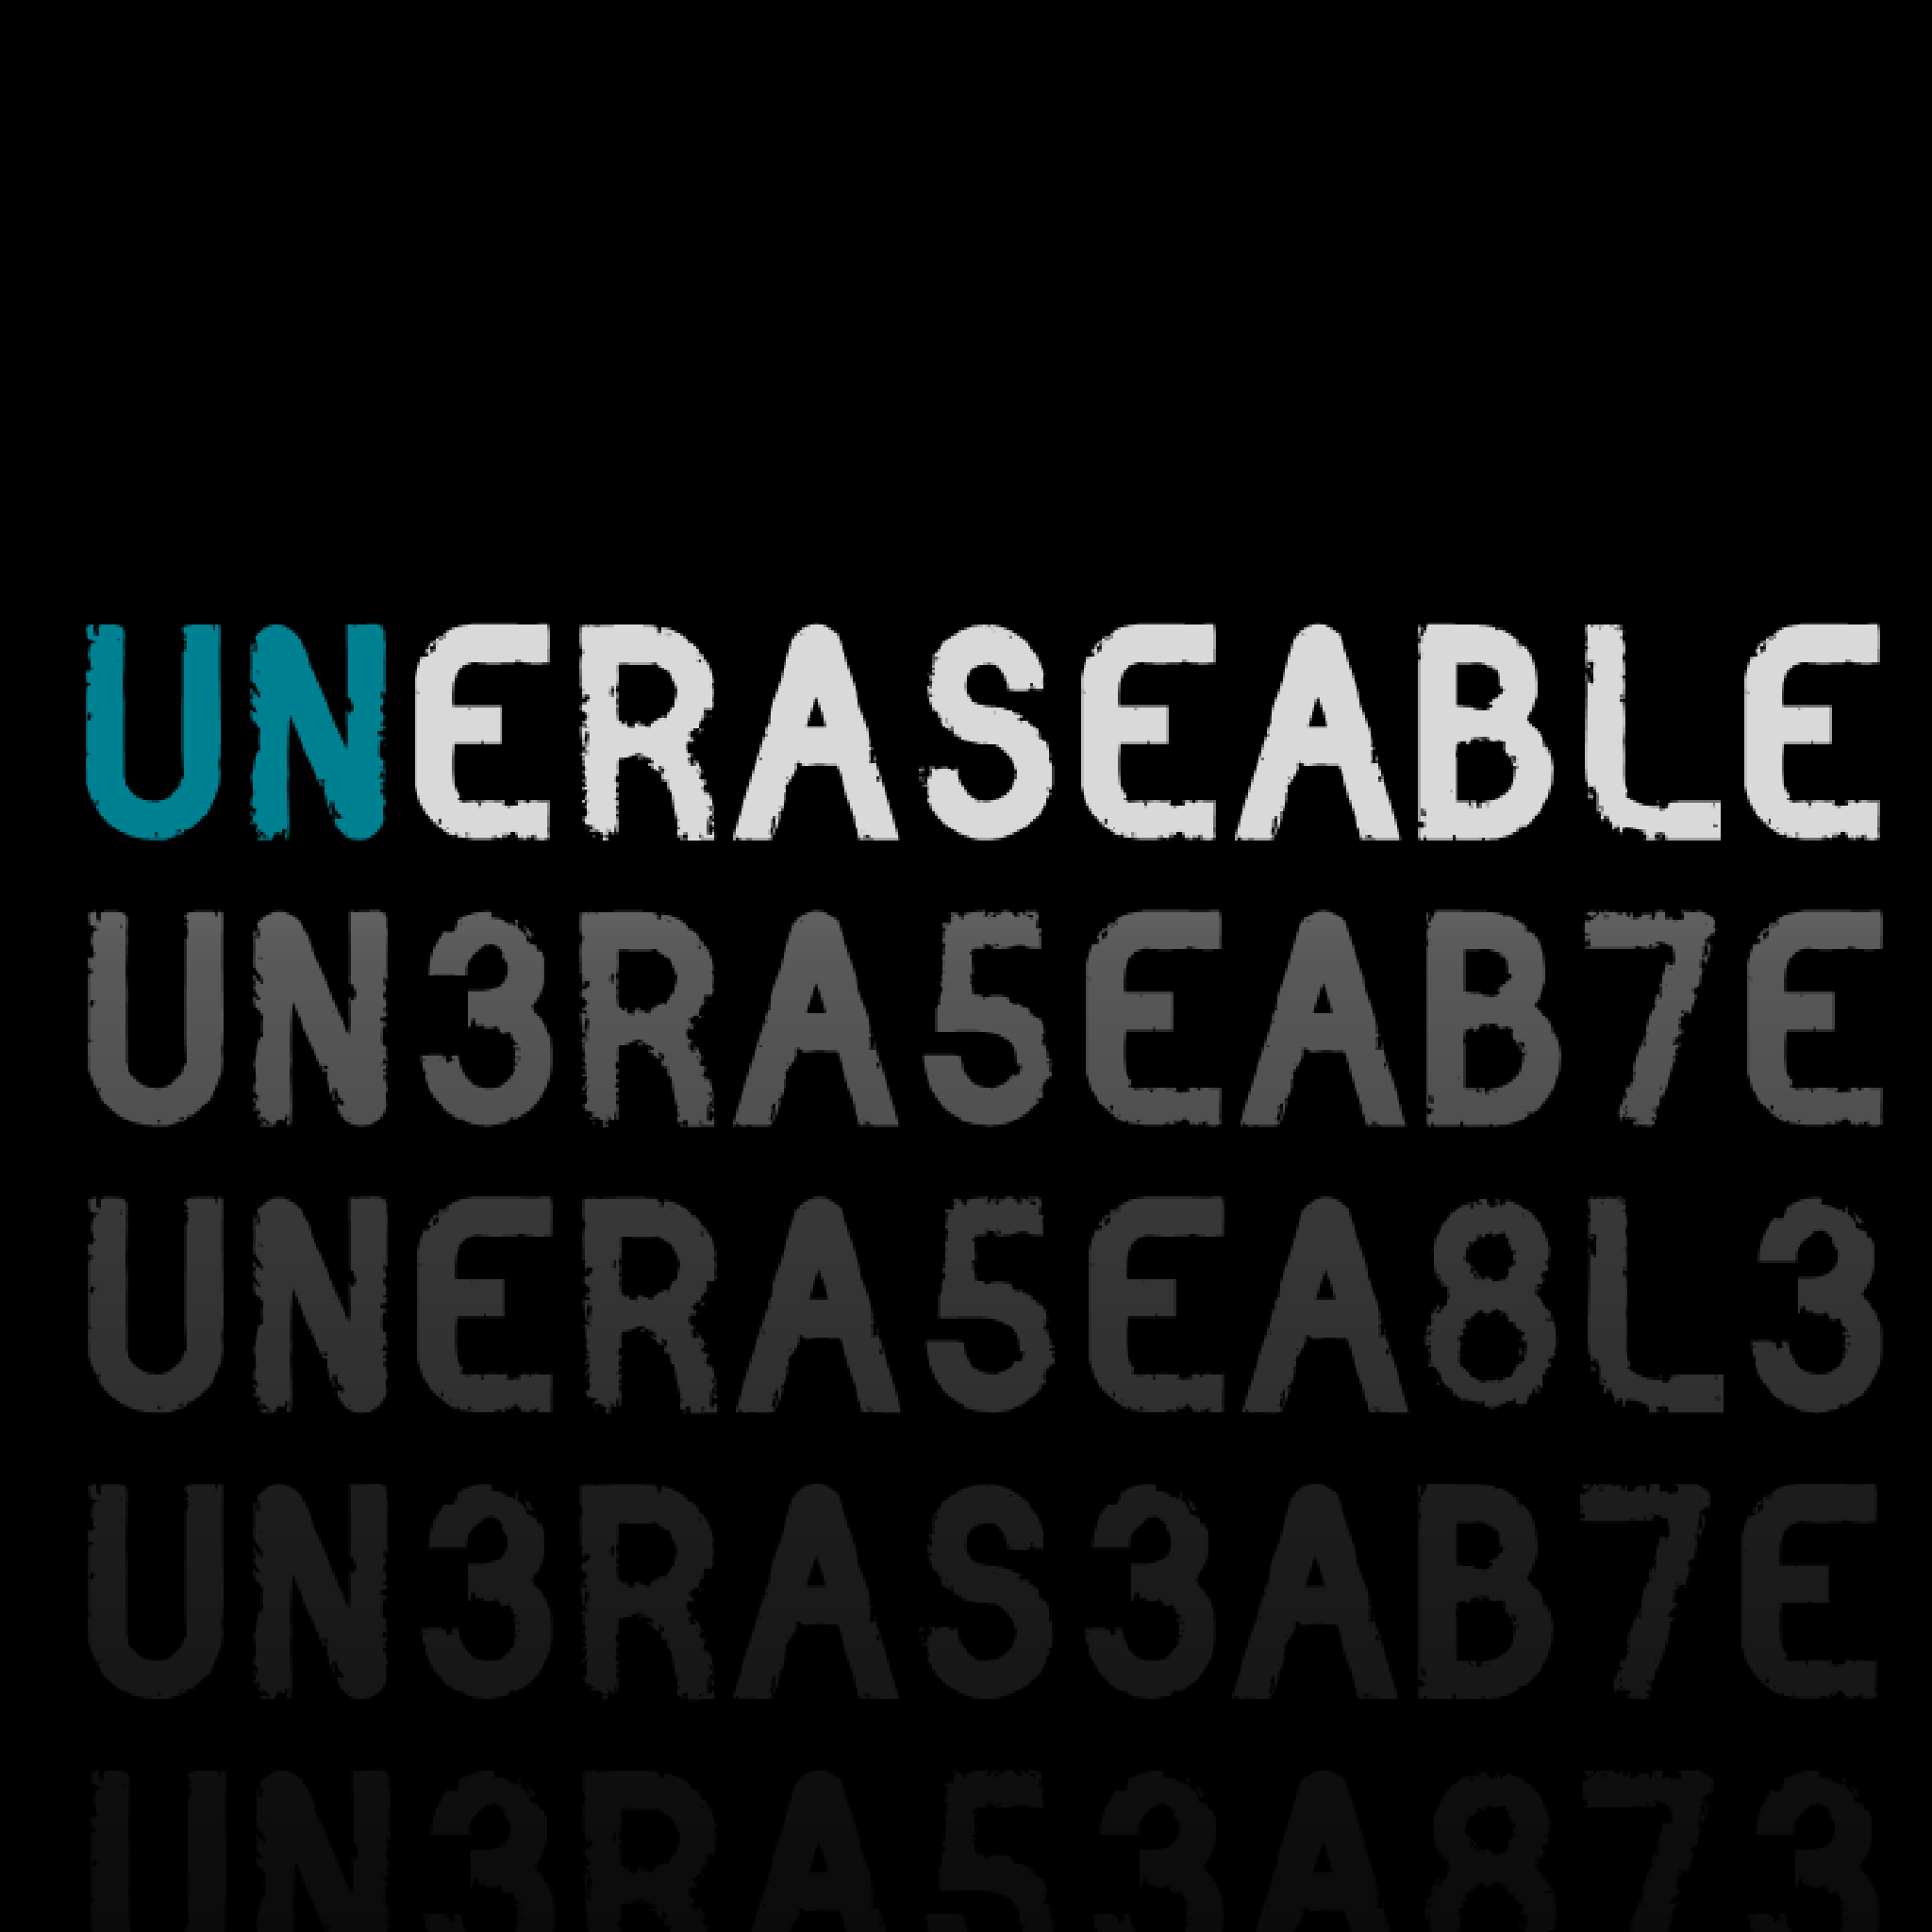 UNERASEABLE Session 20 - Hyperdonor